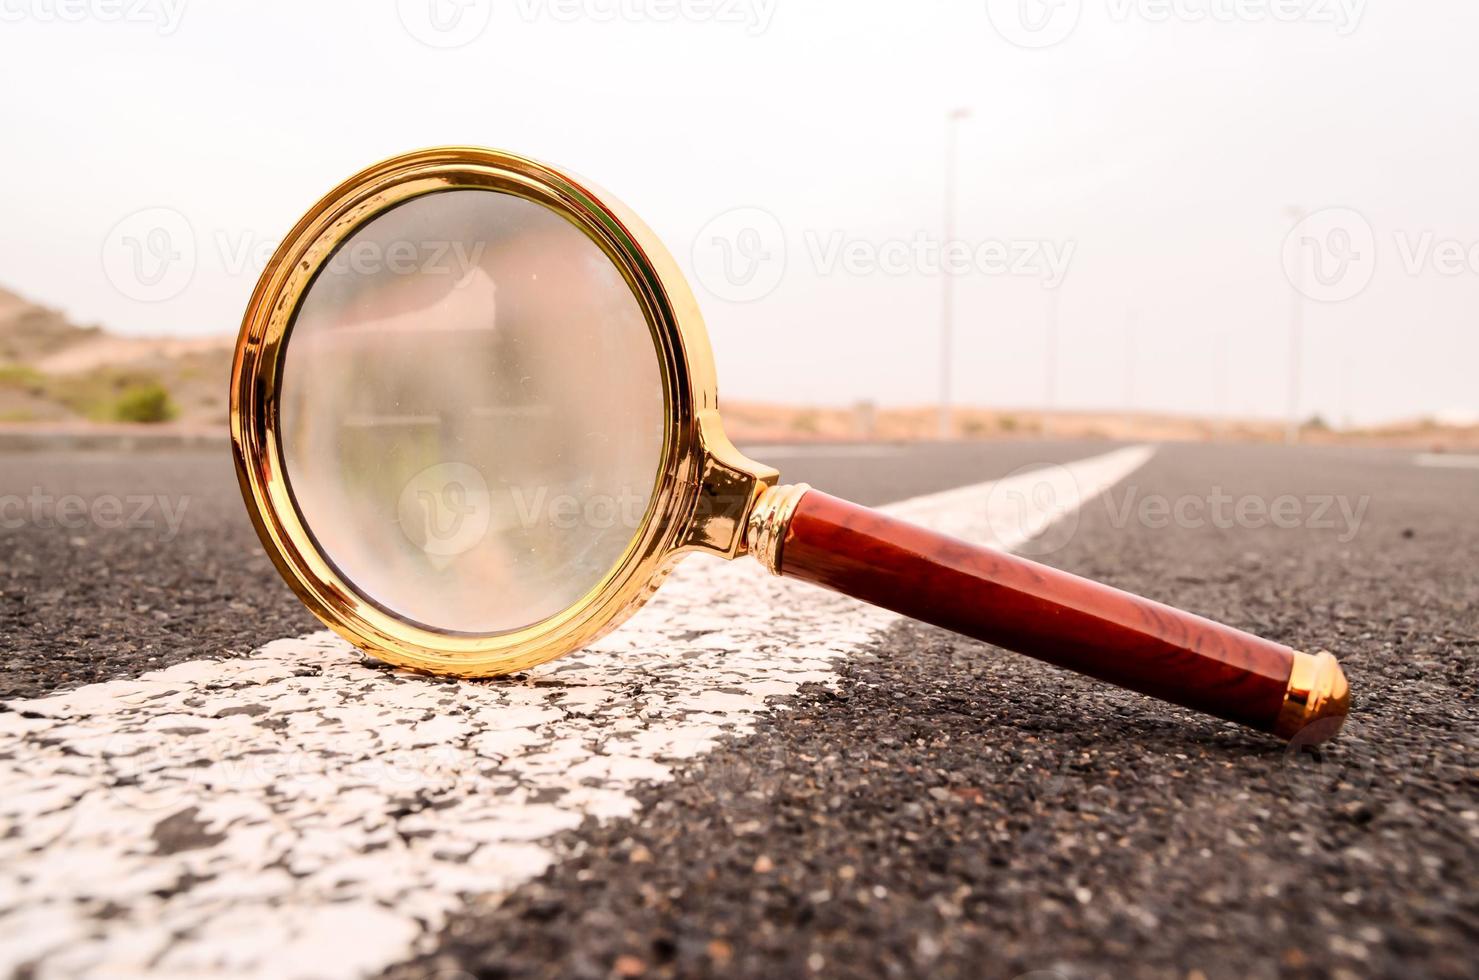 Magnifying glass close up photo